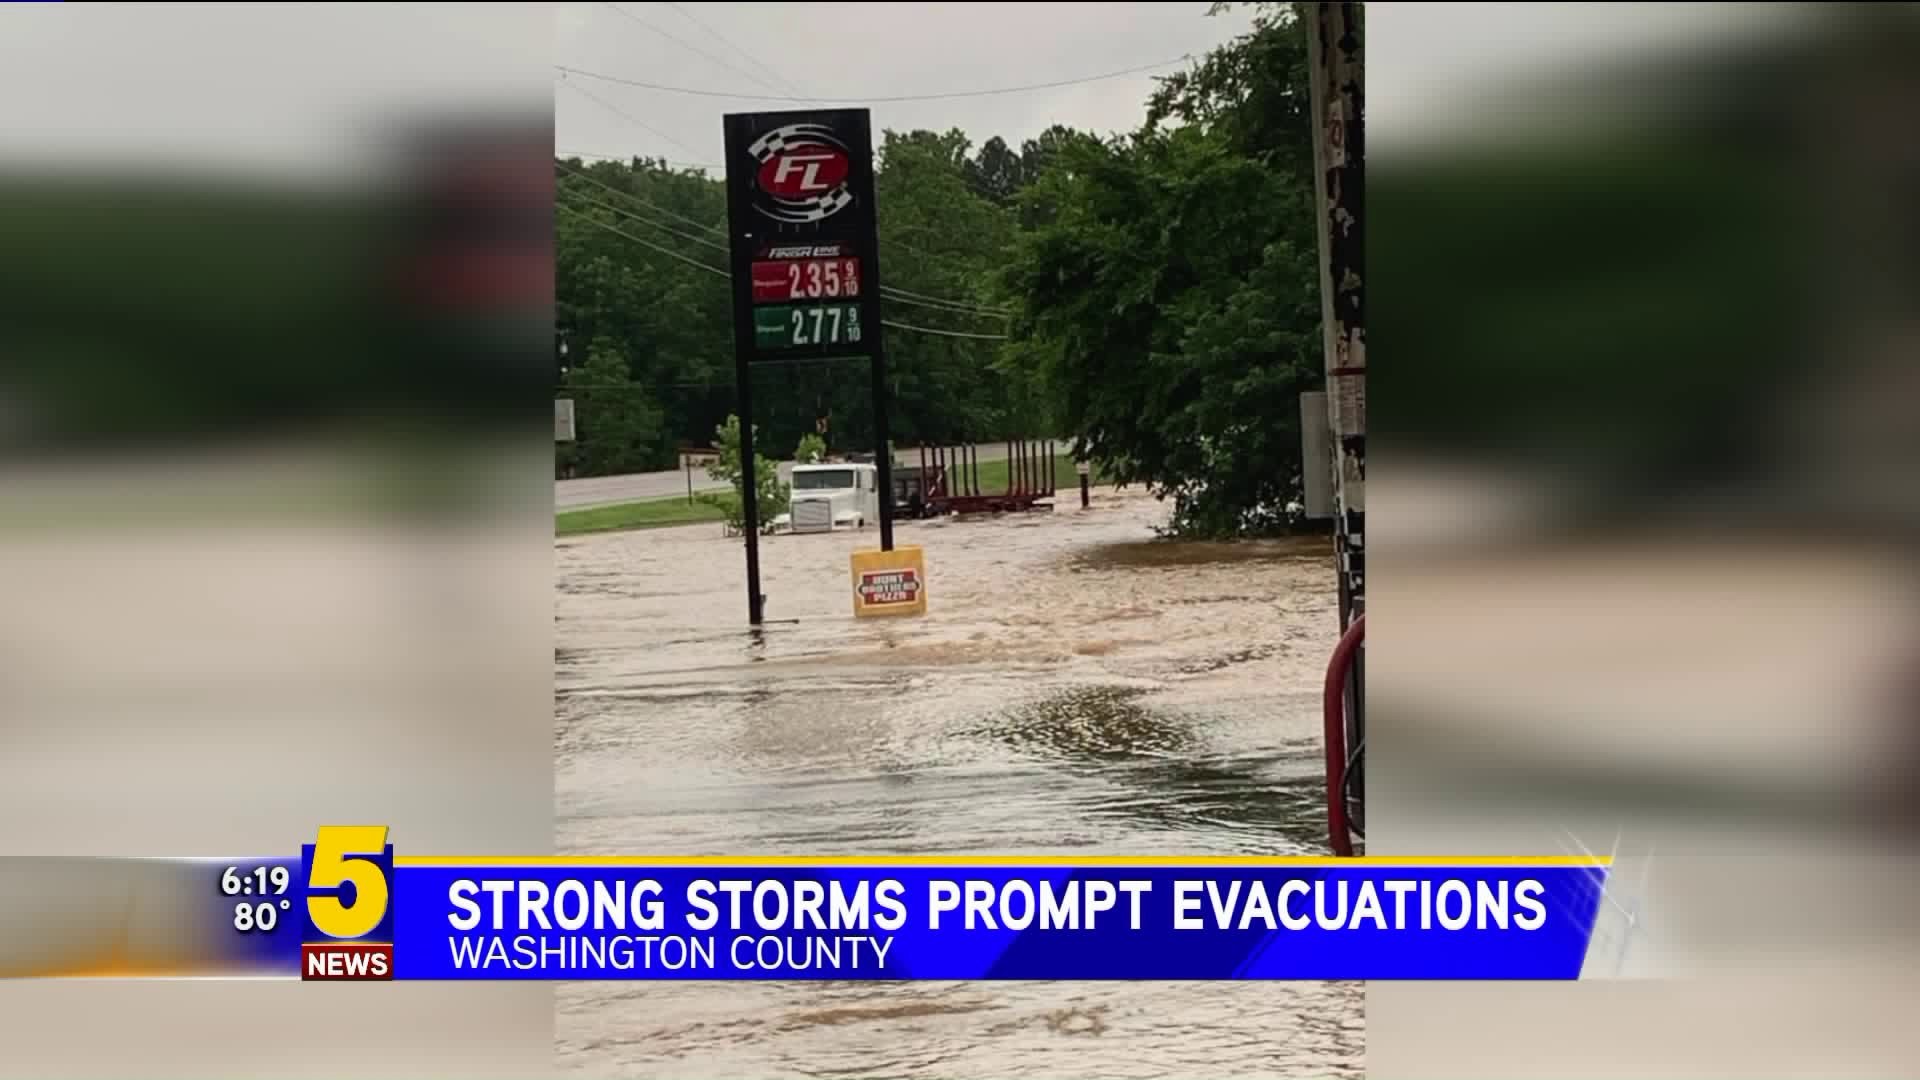 Strong Storms Prompt Evacuations in Washington County